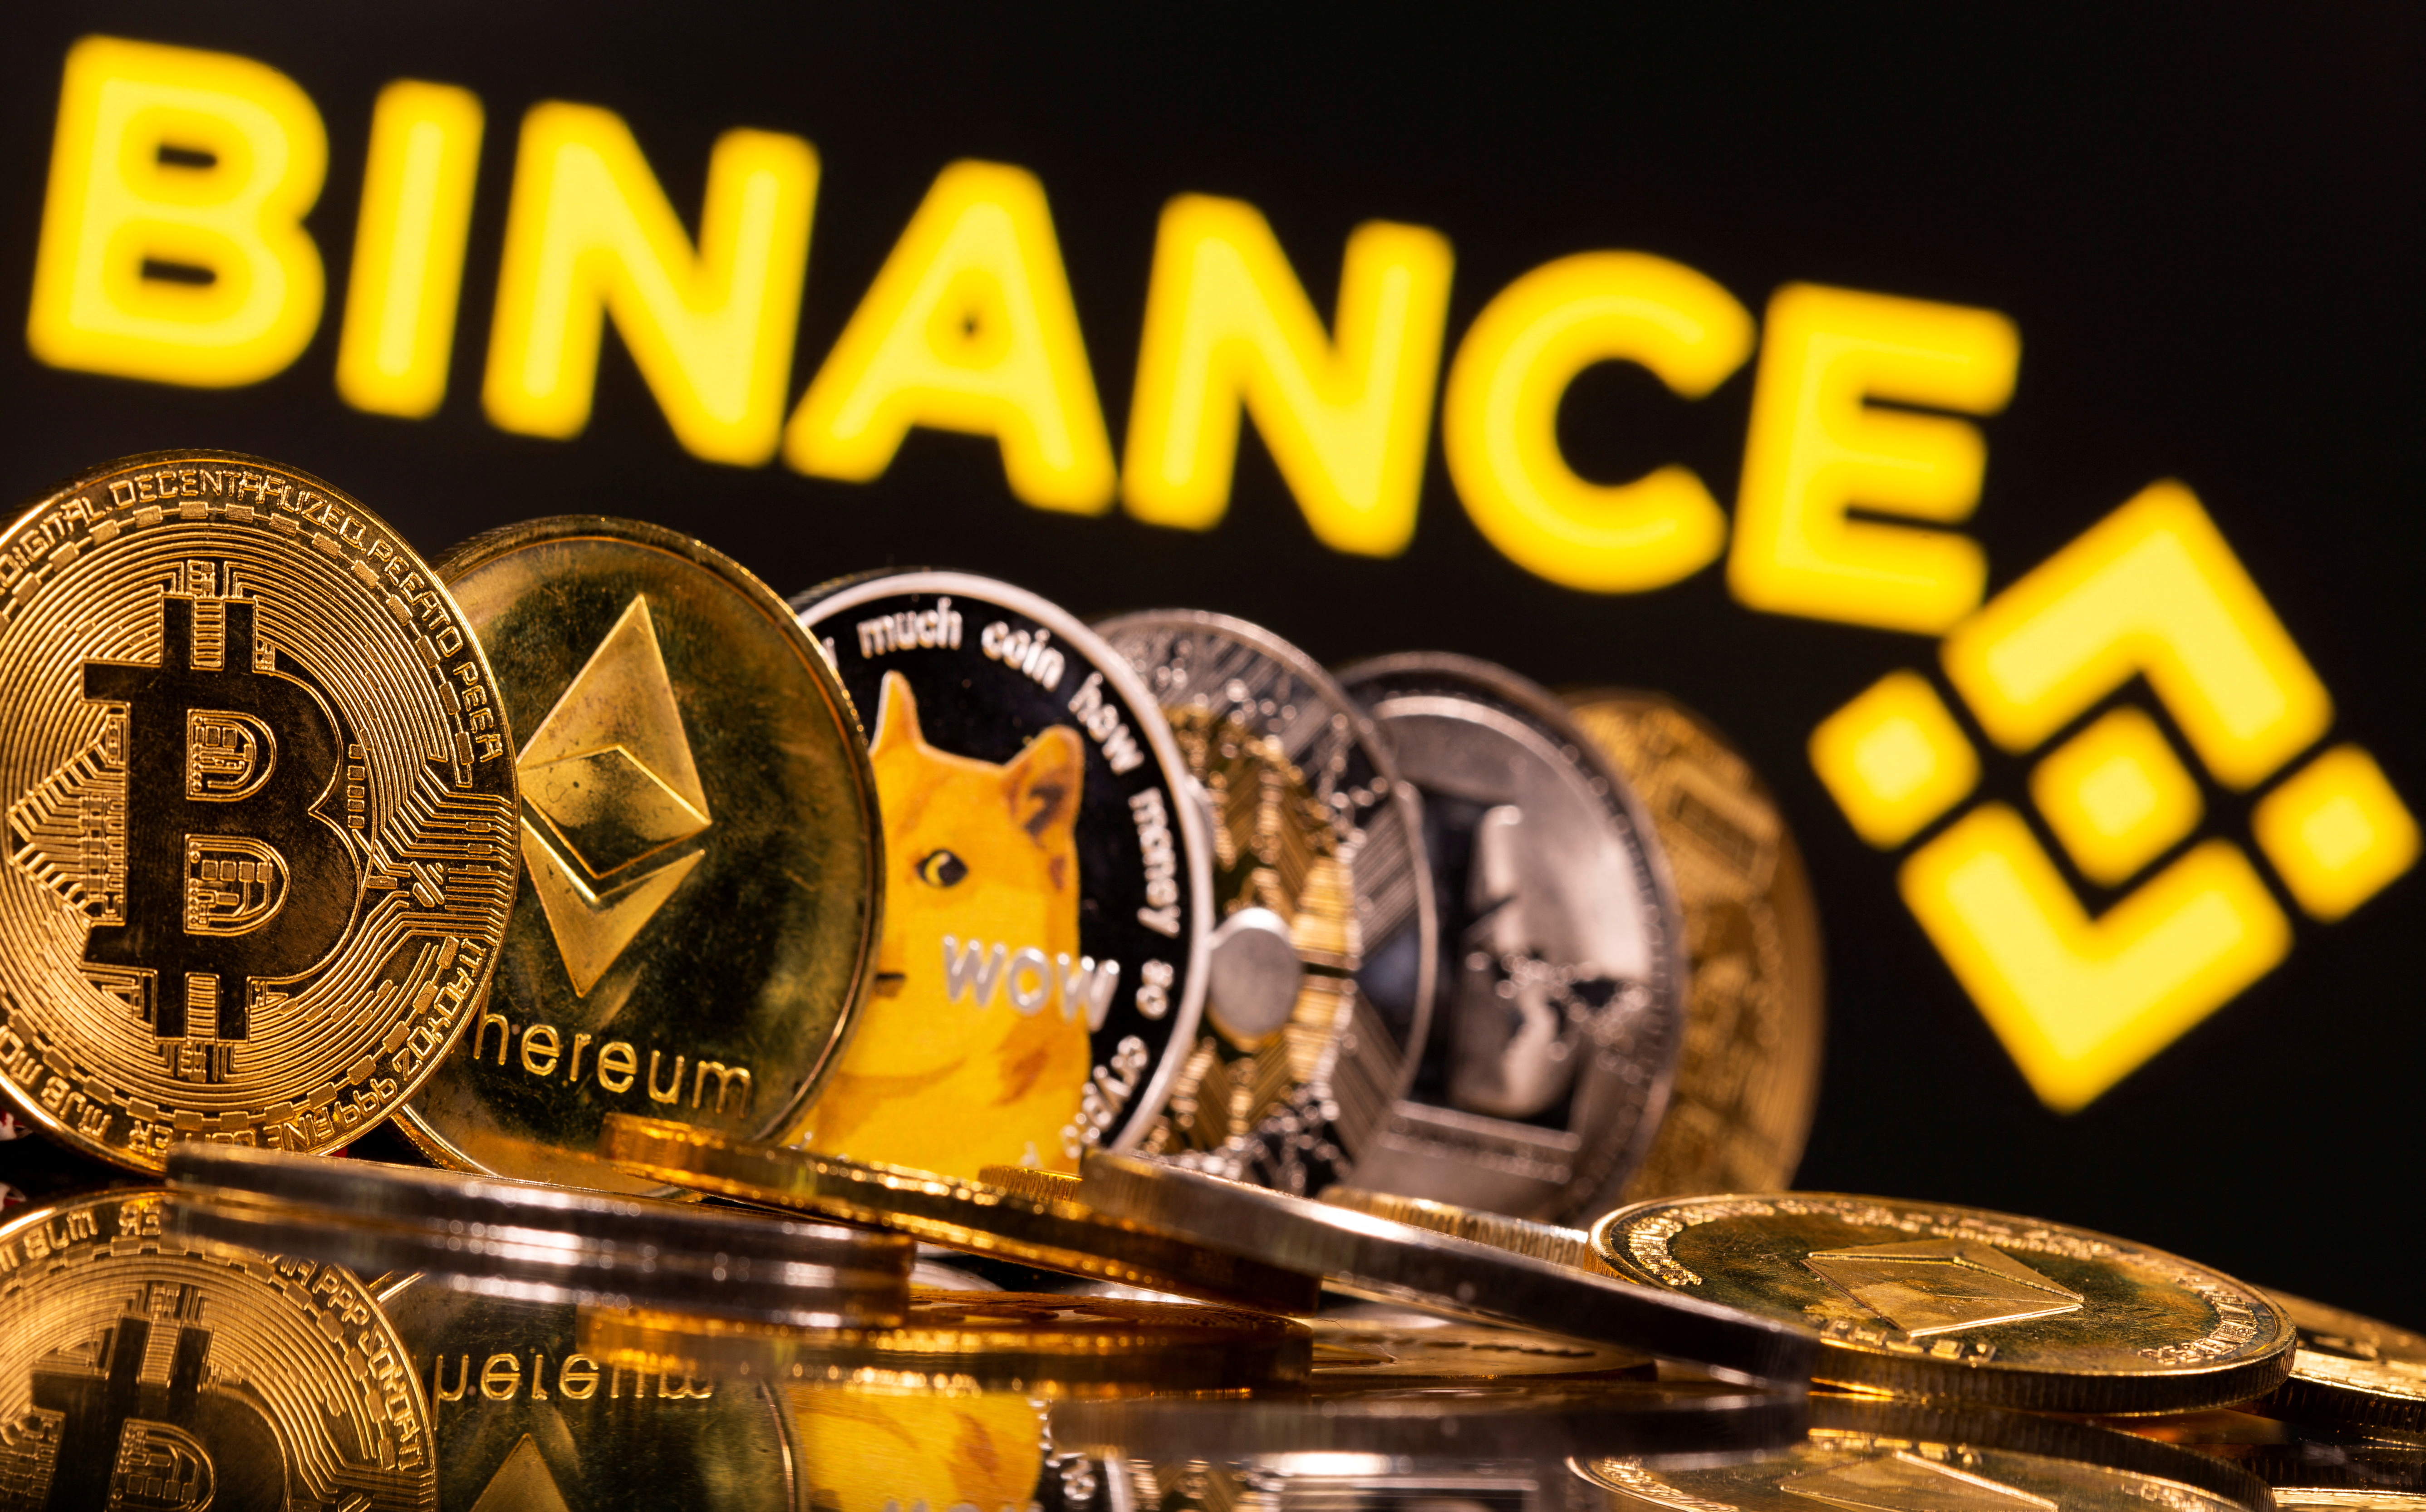 Representations of cryptocurrencies Bitcoin, Ethereum, DogeCoin, Ripple, and Litecoin are seen in front of a displayed Binance logo